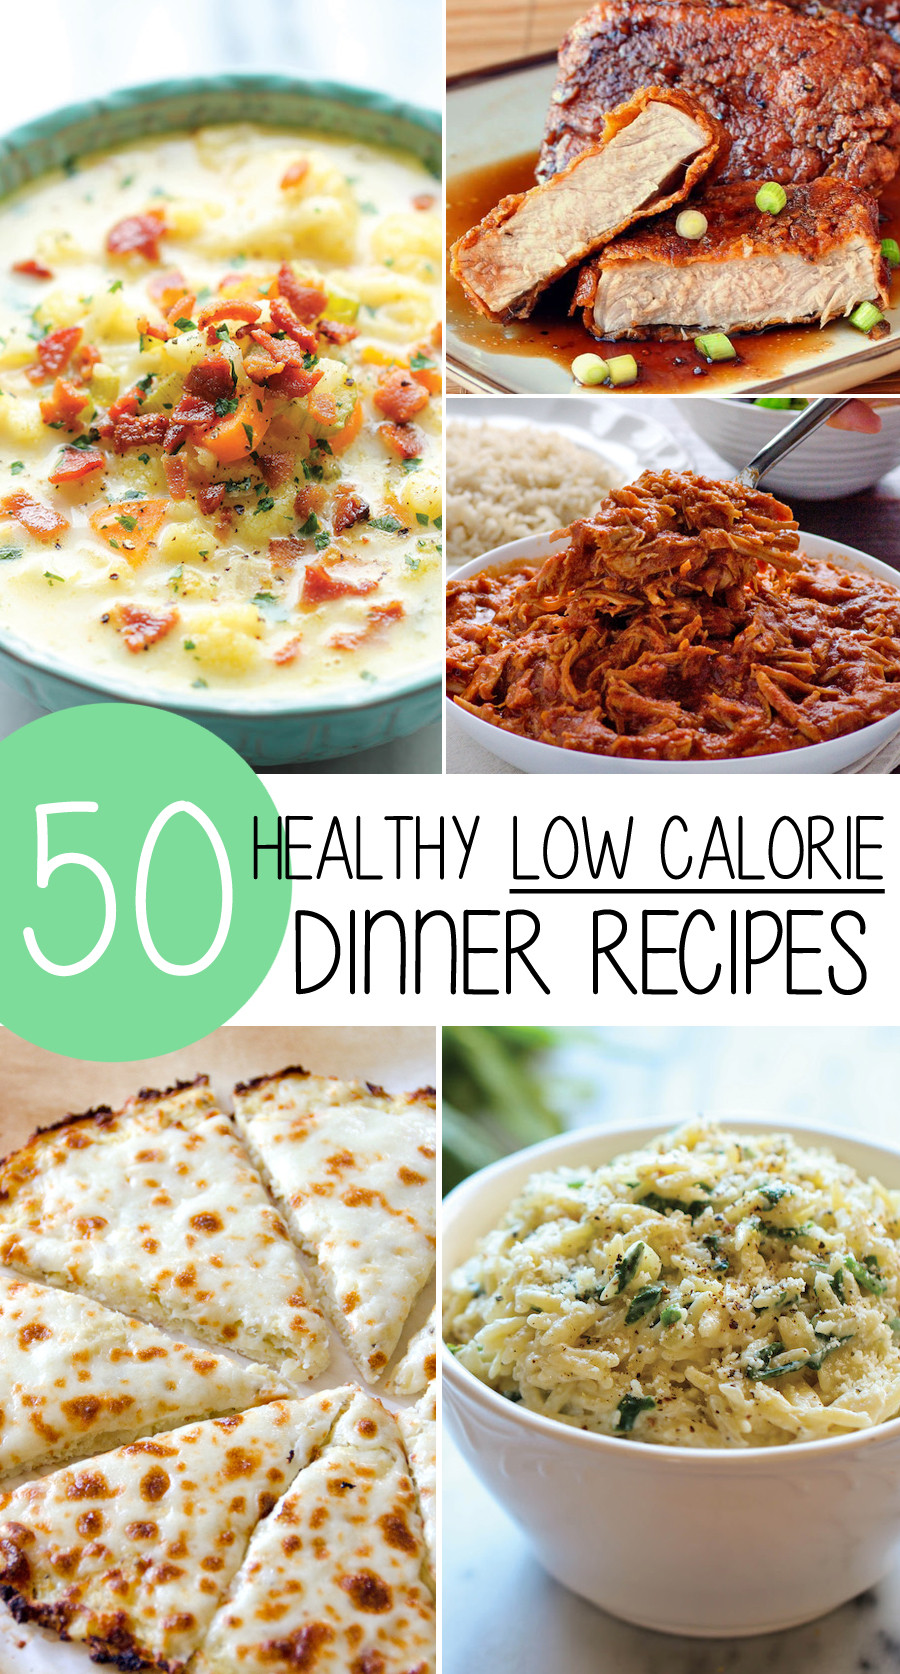 Low Calorie Dinners Easy
 50 Healthy Low Calorie Weight Loss Dinner Recipes